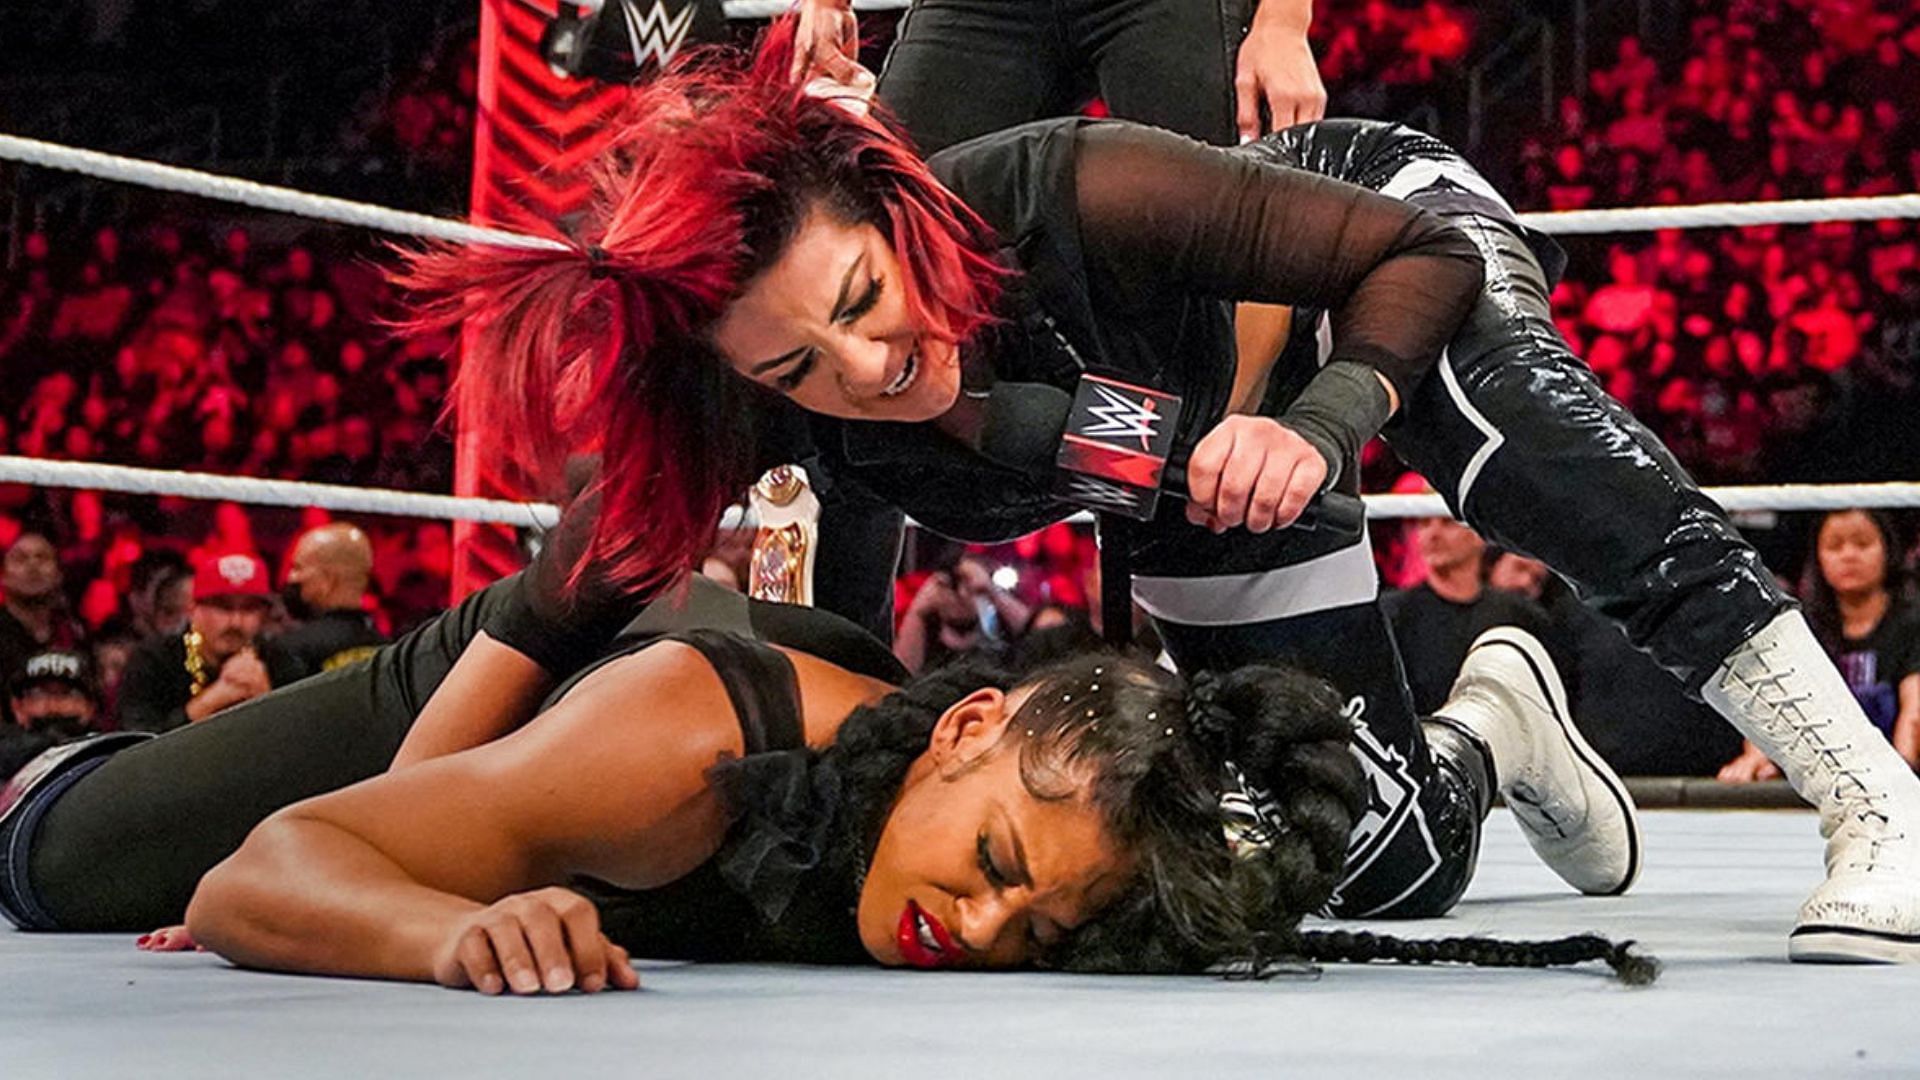 Bayley challenged Bianca Belair to a title match at WWE Extreme Rules